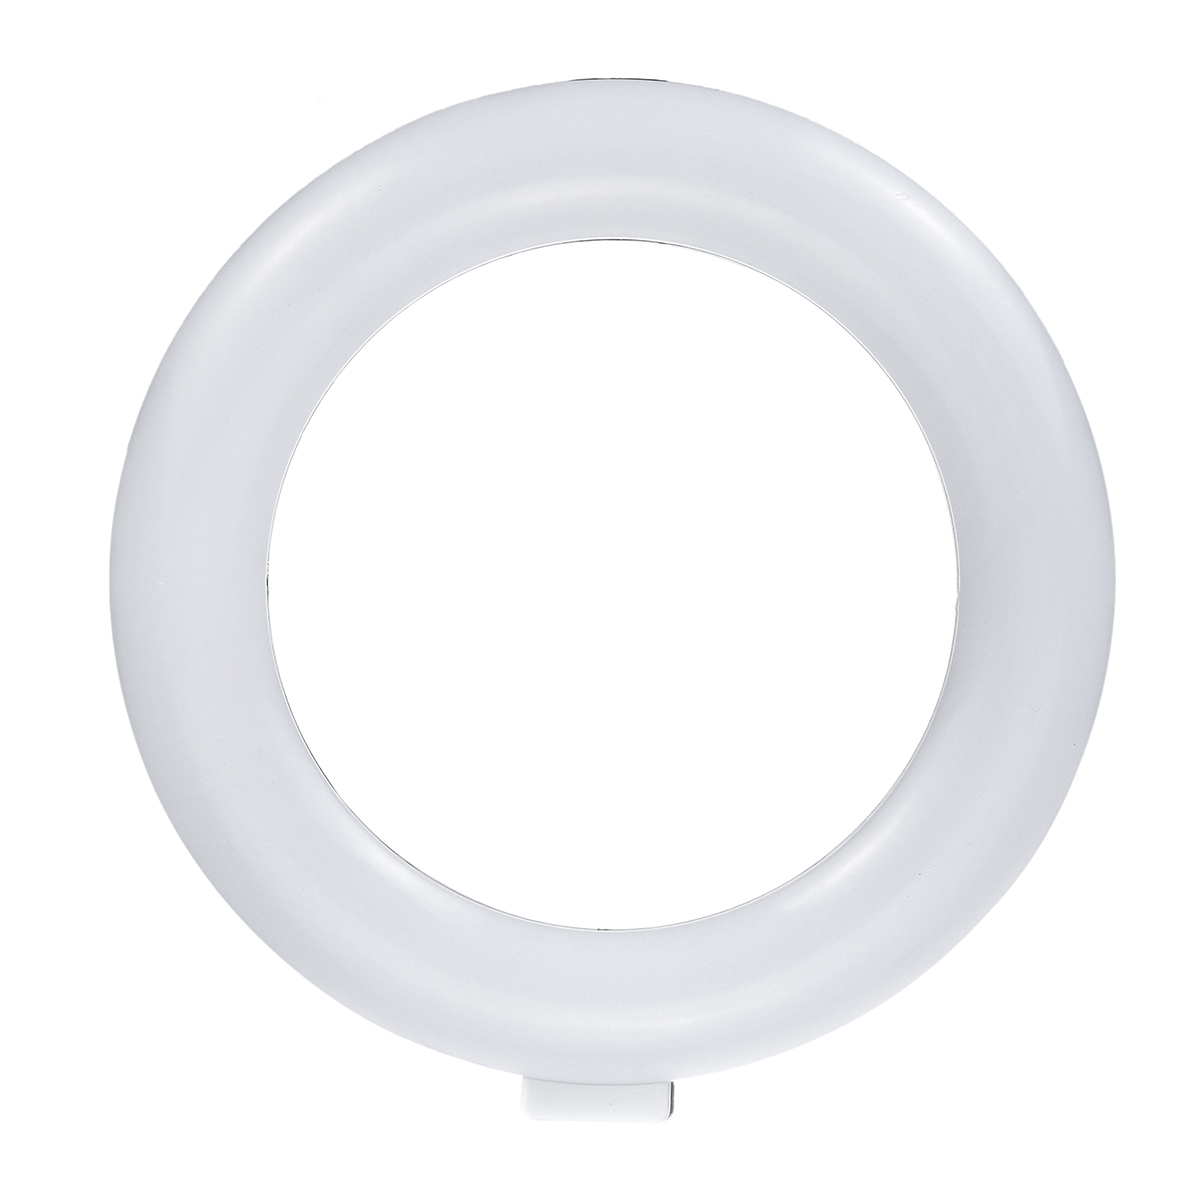 Photography-LED-Mirrors-Selfie-Ring-Light-260MM-Dimmable-Camera-Phone-Lamp-Fill-Light-with-Table-Tri-1632273-10